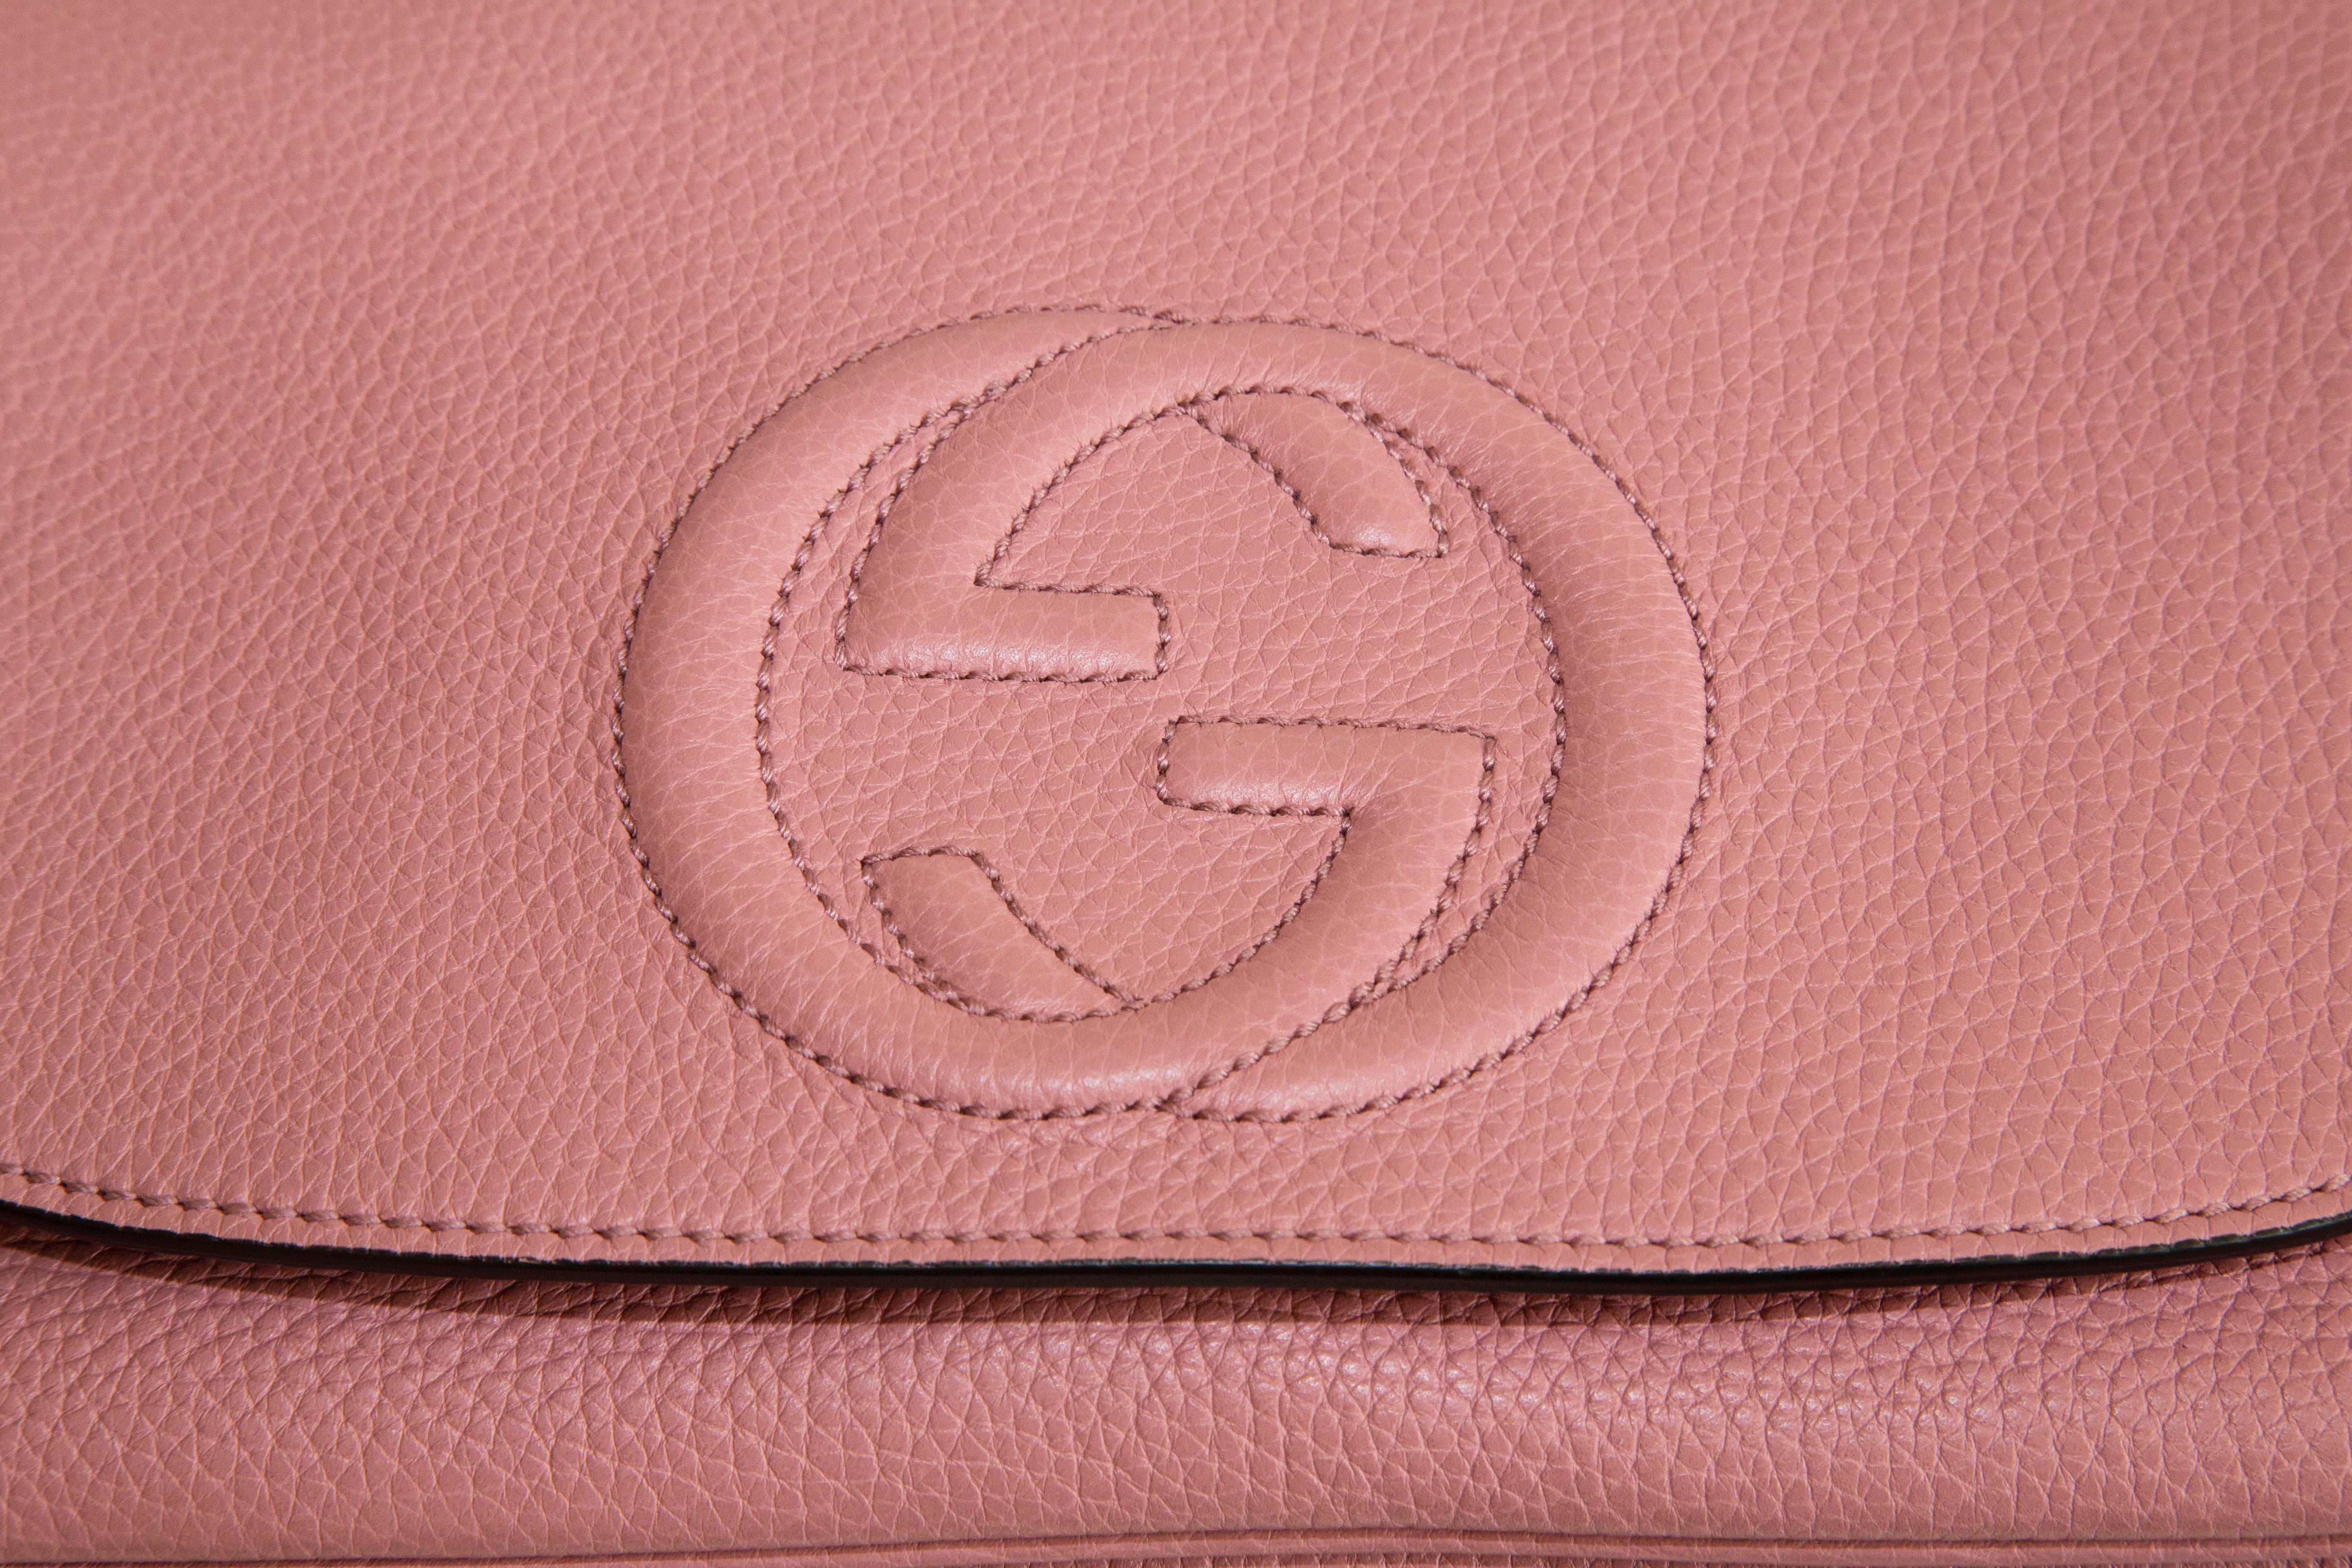 Women's Gucci Soho Pink Leather Crossbody Bag For Sale